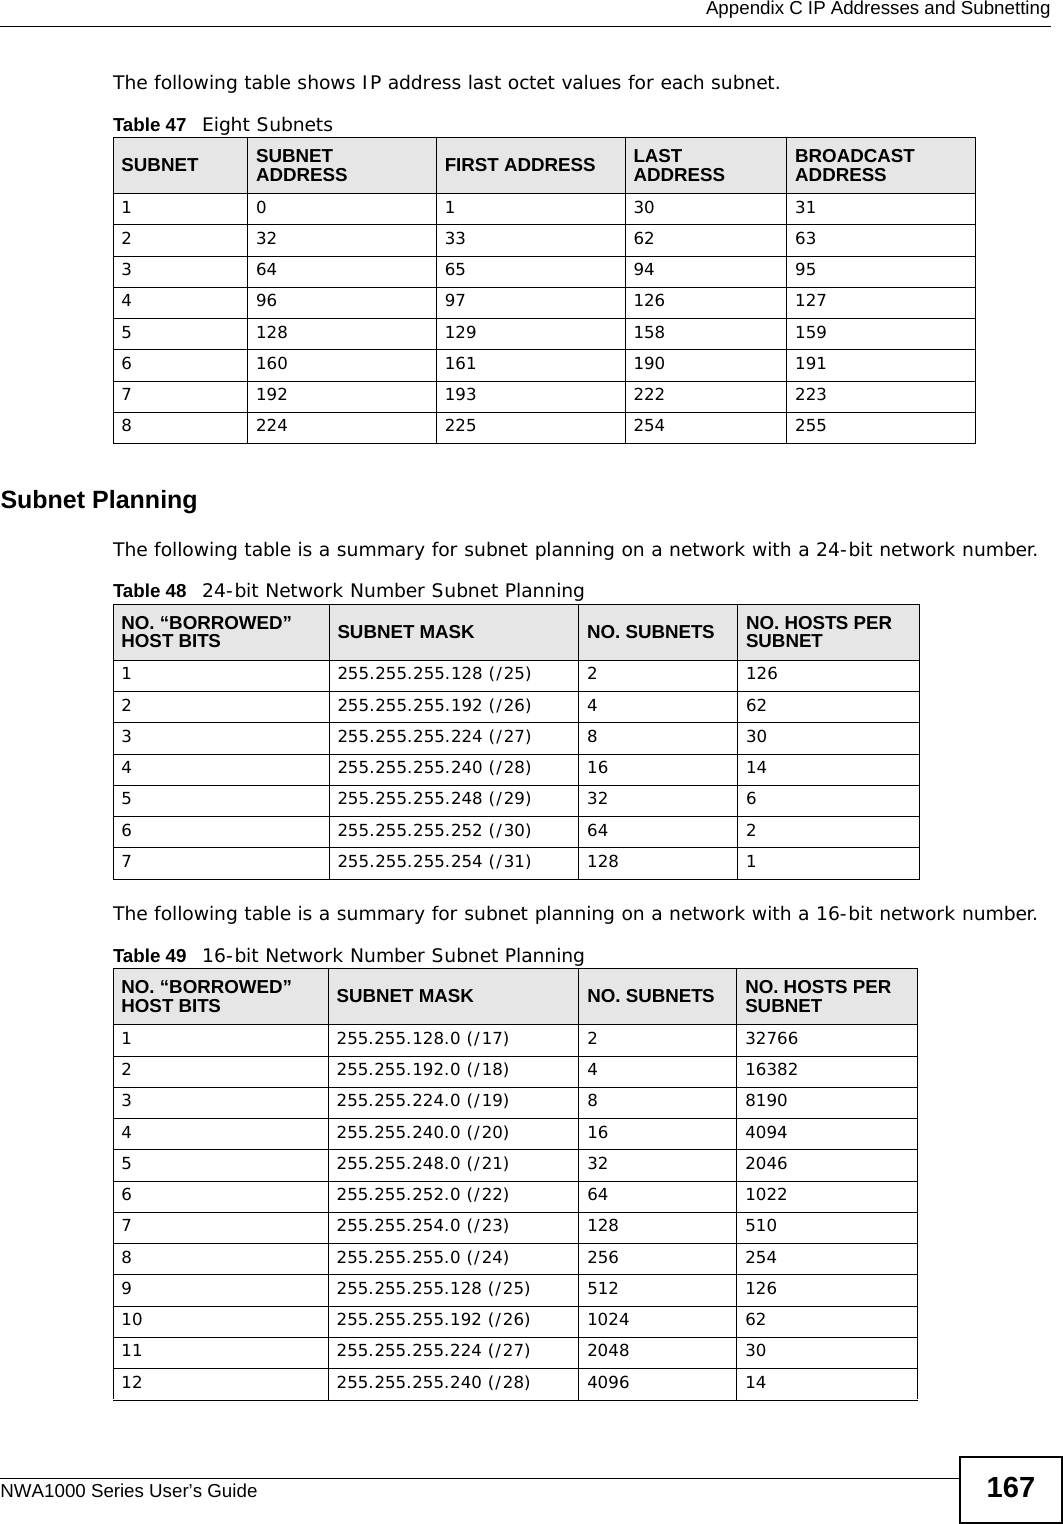  Appendix C IP Addresses and SubnettingNWA1000 Series User’s Guide 167The following table shows IP address last octet values for each subnet.Subnet PlanningThe following table is a summary for subnet planning on a network with a 24-bit network number.The following table is a summary for subnet planning on a network with a 16-bit network number. Table 47   Eight SubnetsSUBNET SUBNET ADDRESS FIRST ADDRESS LAST ADDRESS BROADCAST ADDRESS1 0 1 30 31232 33 62 63364 65 94 95496 97 126 1275128 129 158 1596160 161 190 1917192 193 222 2238224 225 254 255Table 48   24-bit Network Number Subnet PlanningNO. “BORROWED” HOST BITS SUBNET MASK NO. SUBNETS NO. HOSTS PER SUBNET1255.255.255.128 (/25) 21262255.255.255.192 (/26) 4623255.255.255.224 (/27) 8304255.255.255.240 (/28) 16 145255.255.255.248 (/29) 32 66255.255.255.252 (/30) 64 27255.255.255.254 (/31) 128 1Table 49   16-bit Network Number Subnet PlanningNO. “BORROWED” HOST BITS SUBNET MASK NO. SUBNETS NO. HOSTS PER SUBNET1255.255.128.0 (/17) 2327662255.255.192.0 (/18) 4163823255.255.224.0 (/19) 881904255.255.240.0 (/20) 16 40945255.255.248.0 (/21) 32 20466255.255.252.0 (/22) 64 10227255.255.254.0 (/23) 128 5108255.255.255.0 (/24) 256 2549255.255.255.128 (/25) 512 12610 255.255.255.192 (/26) 1024 6211 255.255.255.224 (/27) 2048 3012 255.255.255.240 (/28) 4096 14